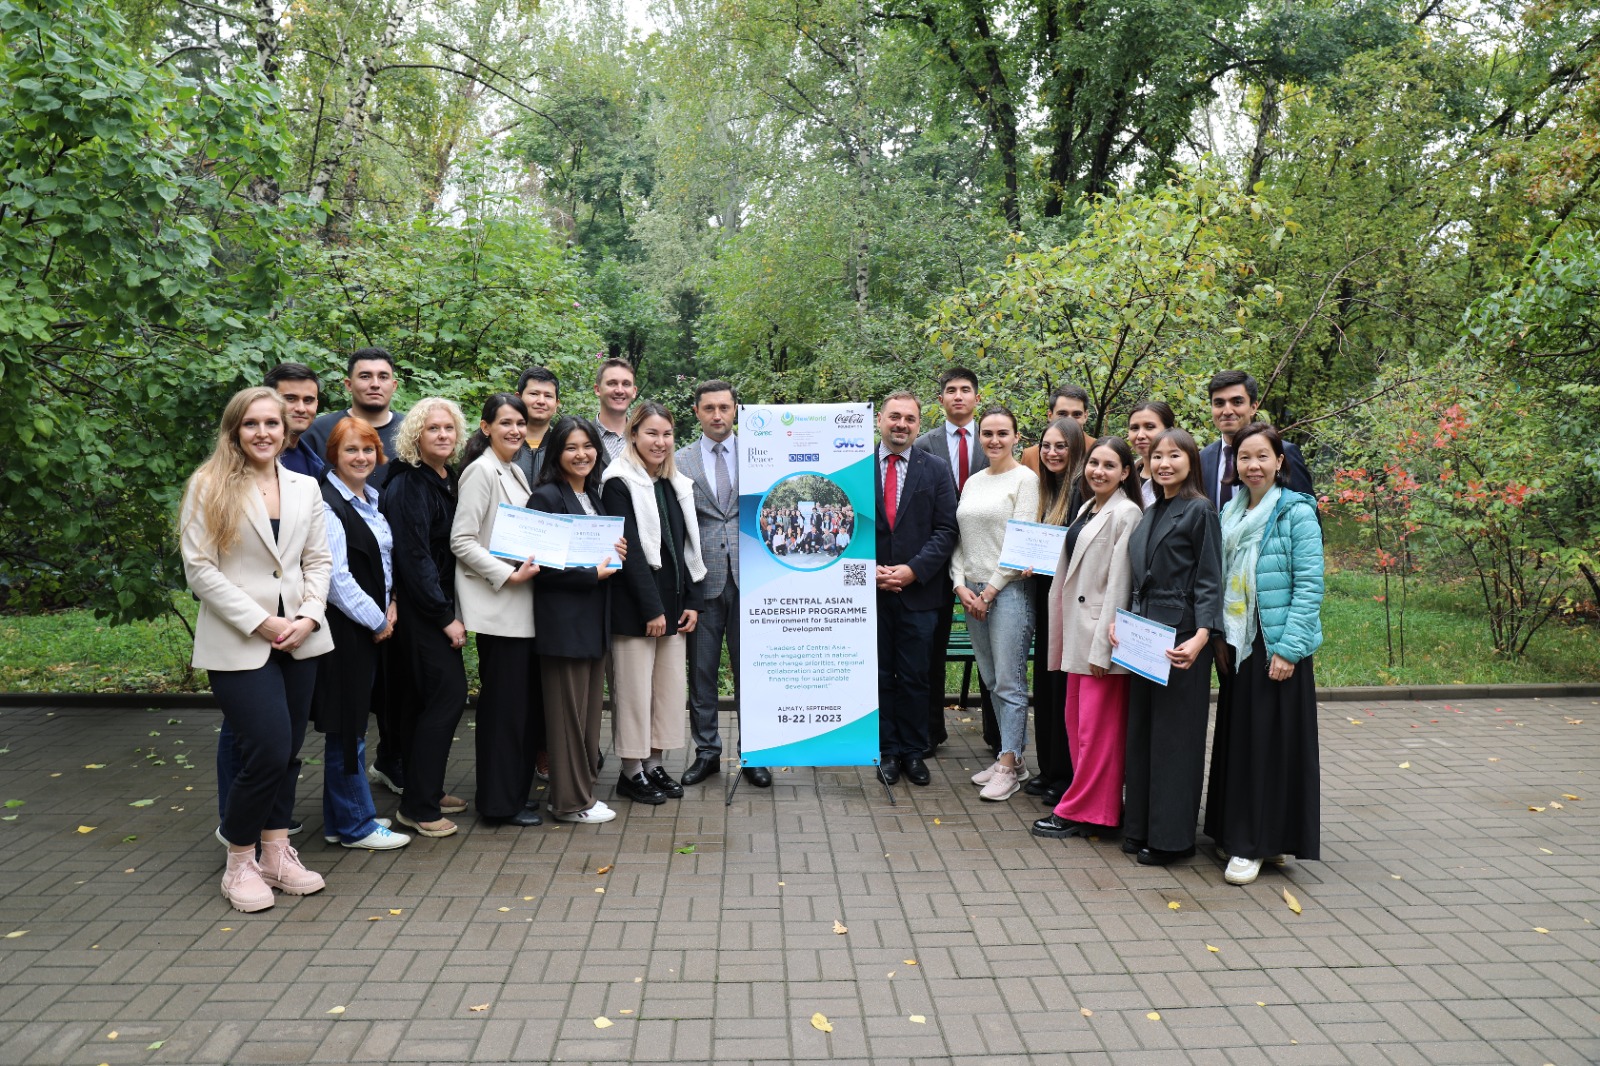 The 13th Central Asian leadership program on environment for sustainable development (CALP) successfully completed